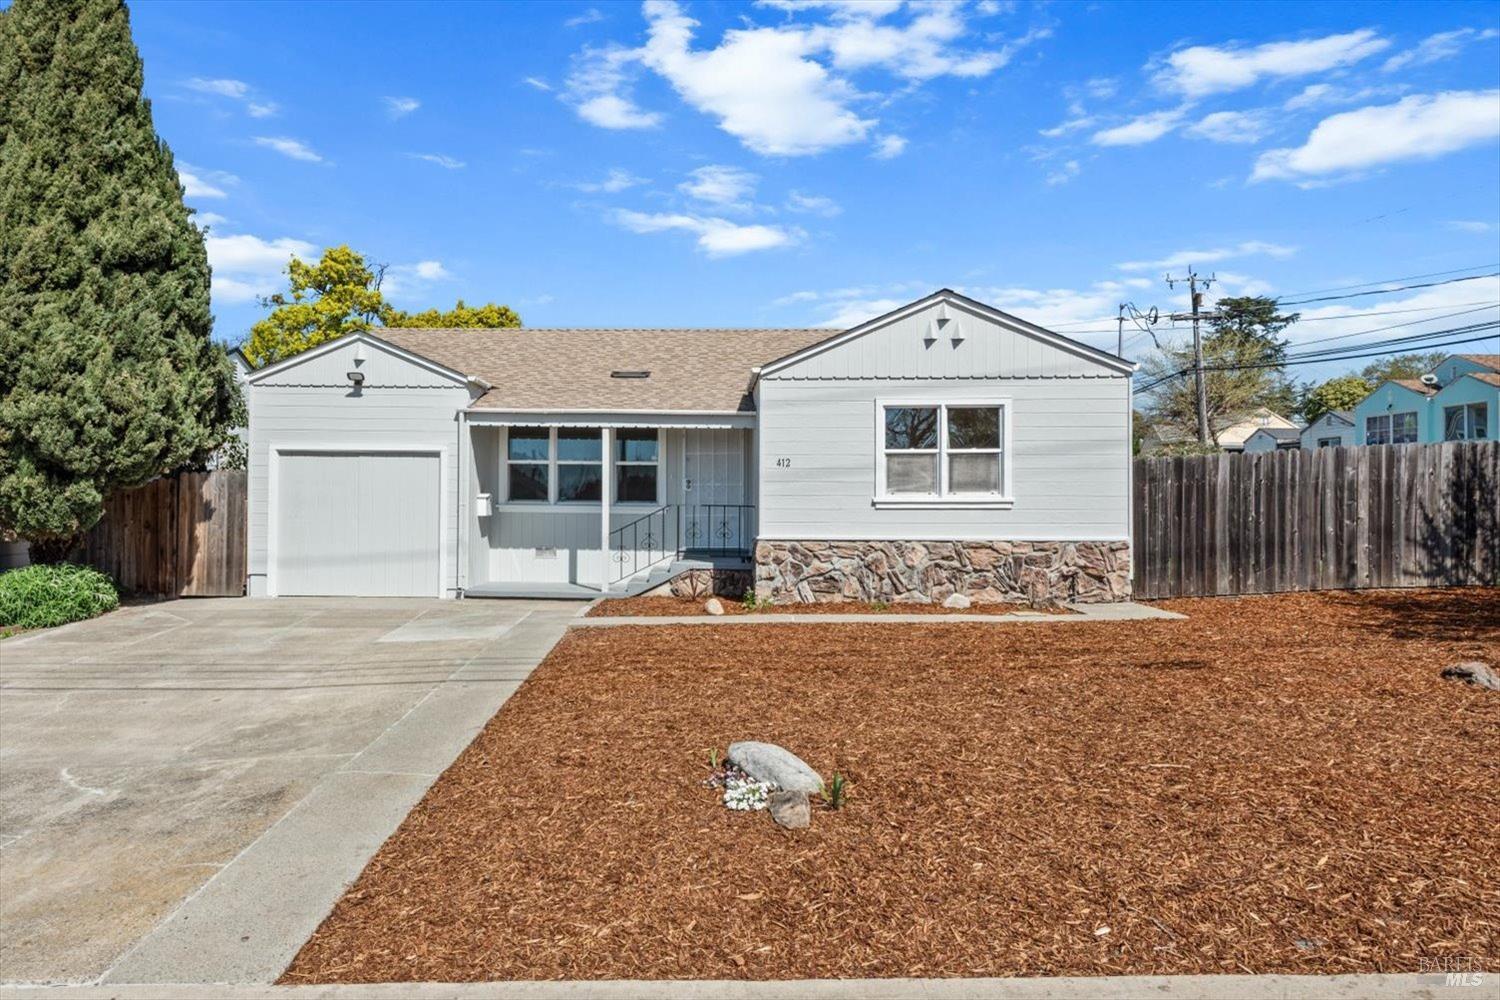 Photo of 412 Cypress Ave in Vallejo, CA